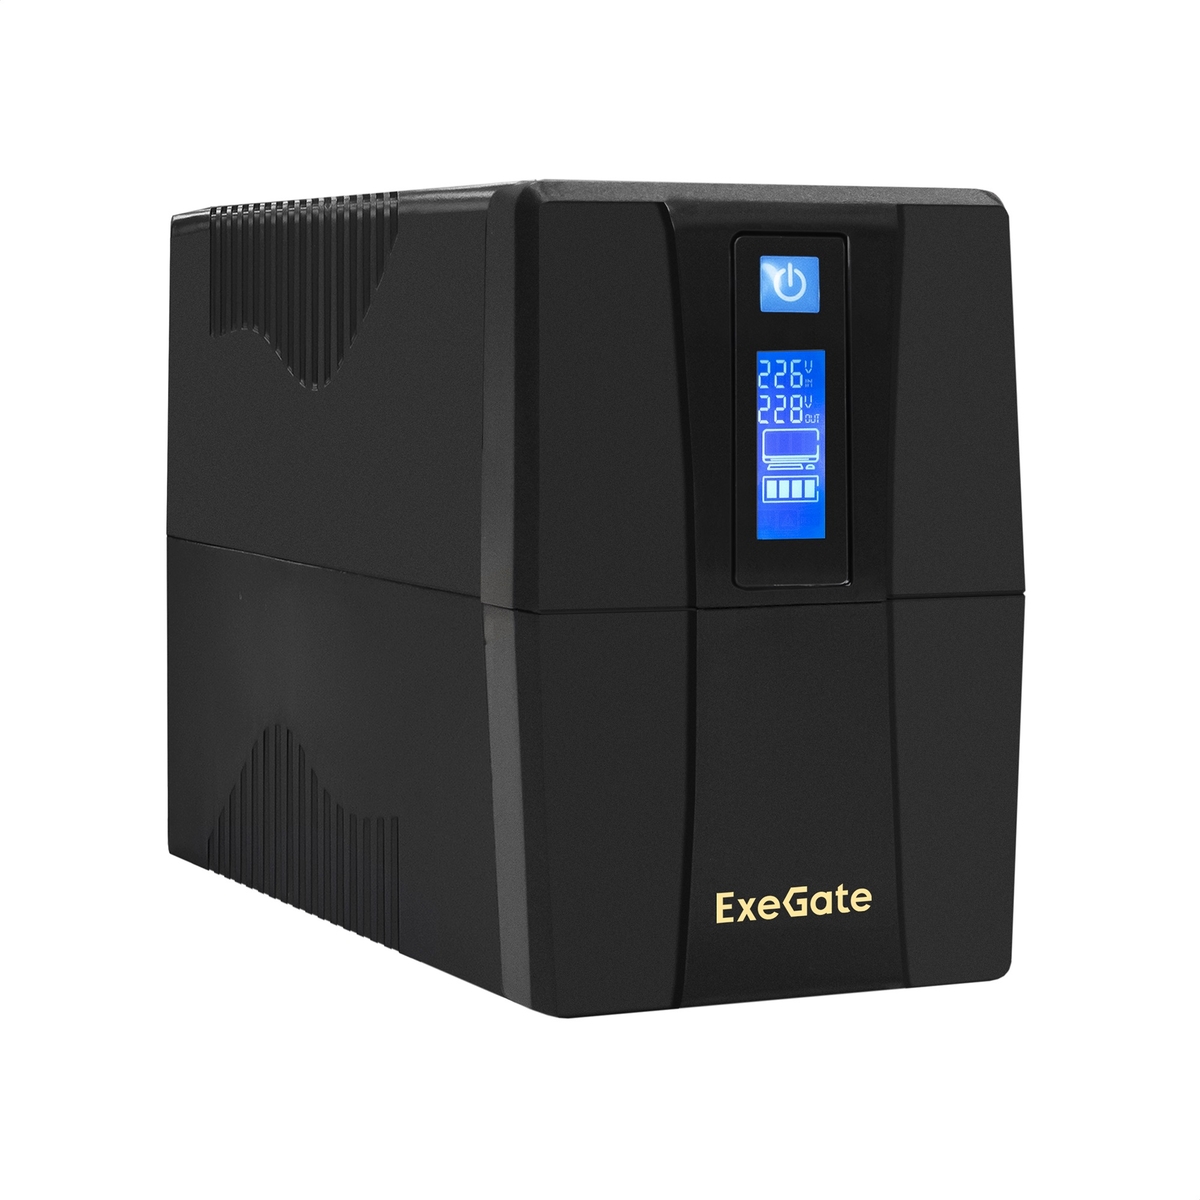  ExeGate SpecialPro Smart LLB-600.LCD.AVR.4C13